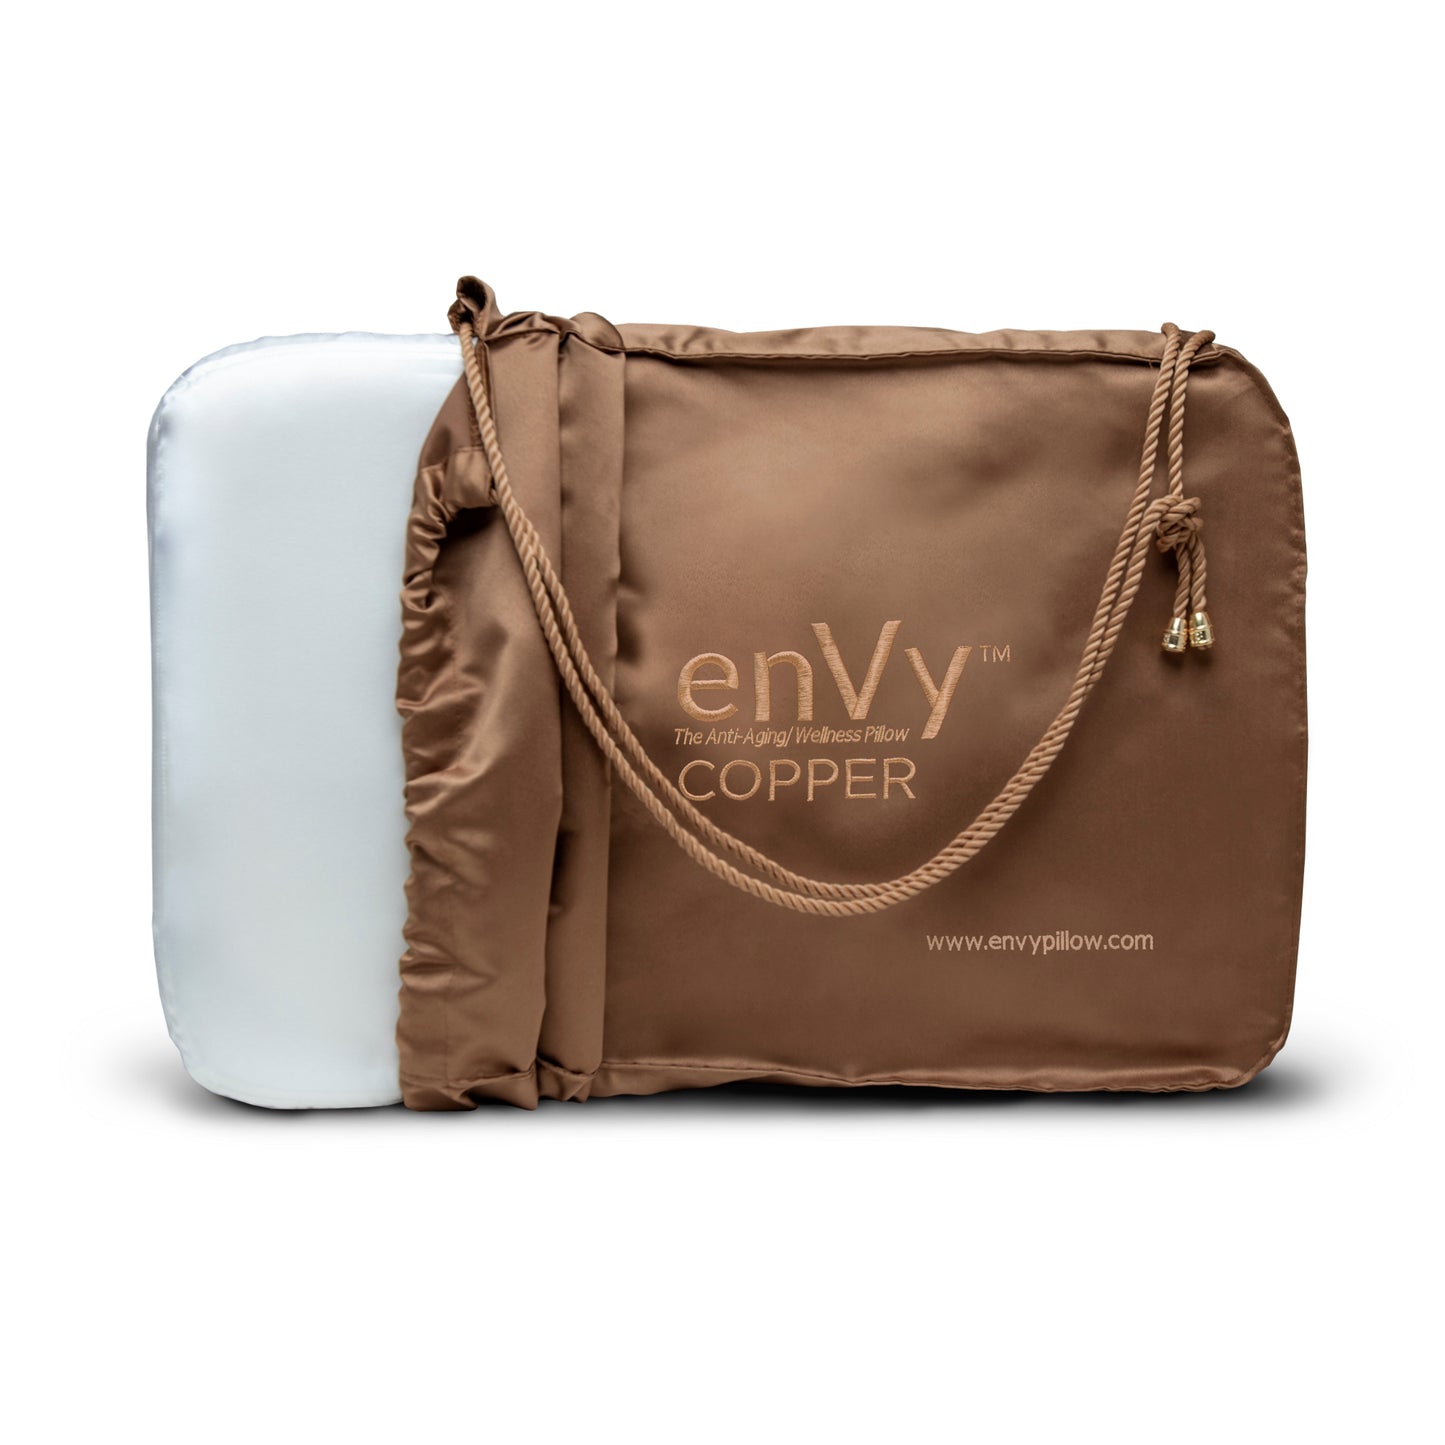 The enVy® COPPER + Eucalyptus TENCEL™  Anti-Aging Pillow - 100% Natural Latex Pillow with COPPER infused TENCEL™  Pillowcase